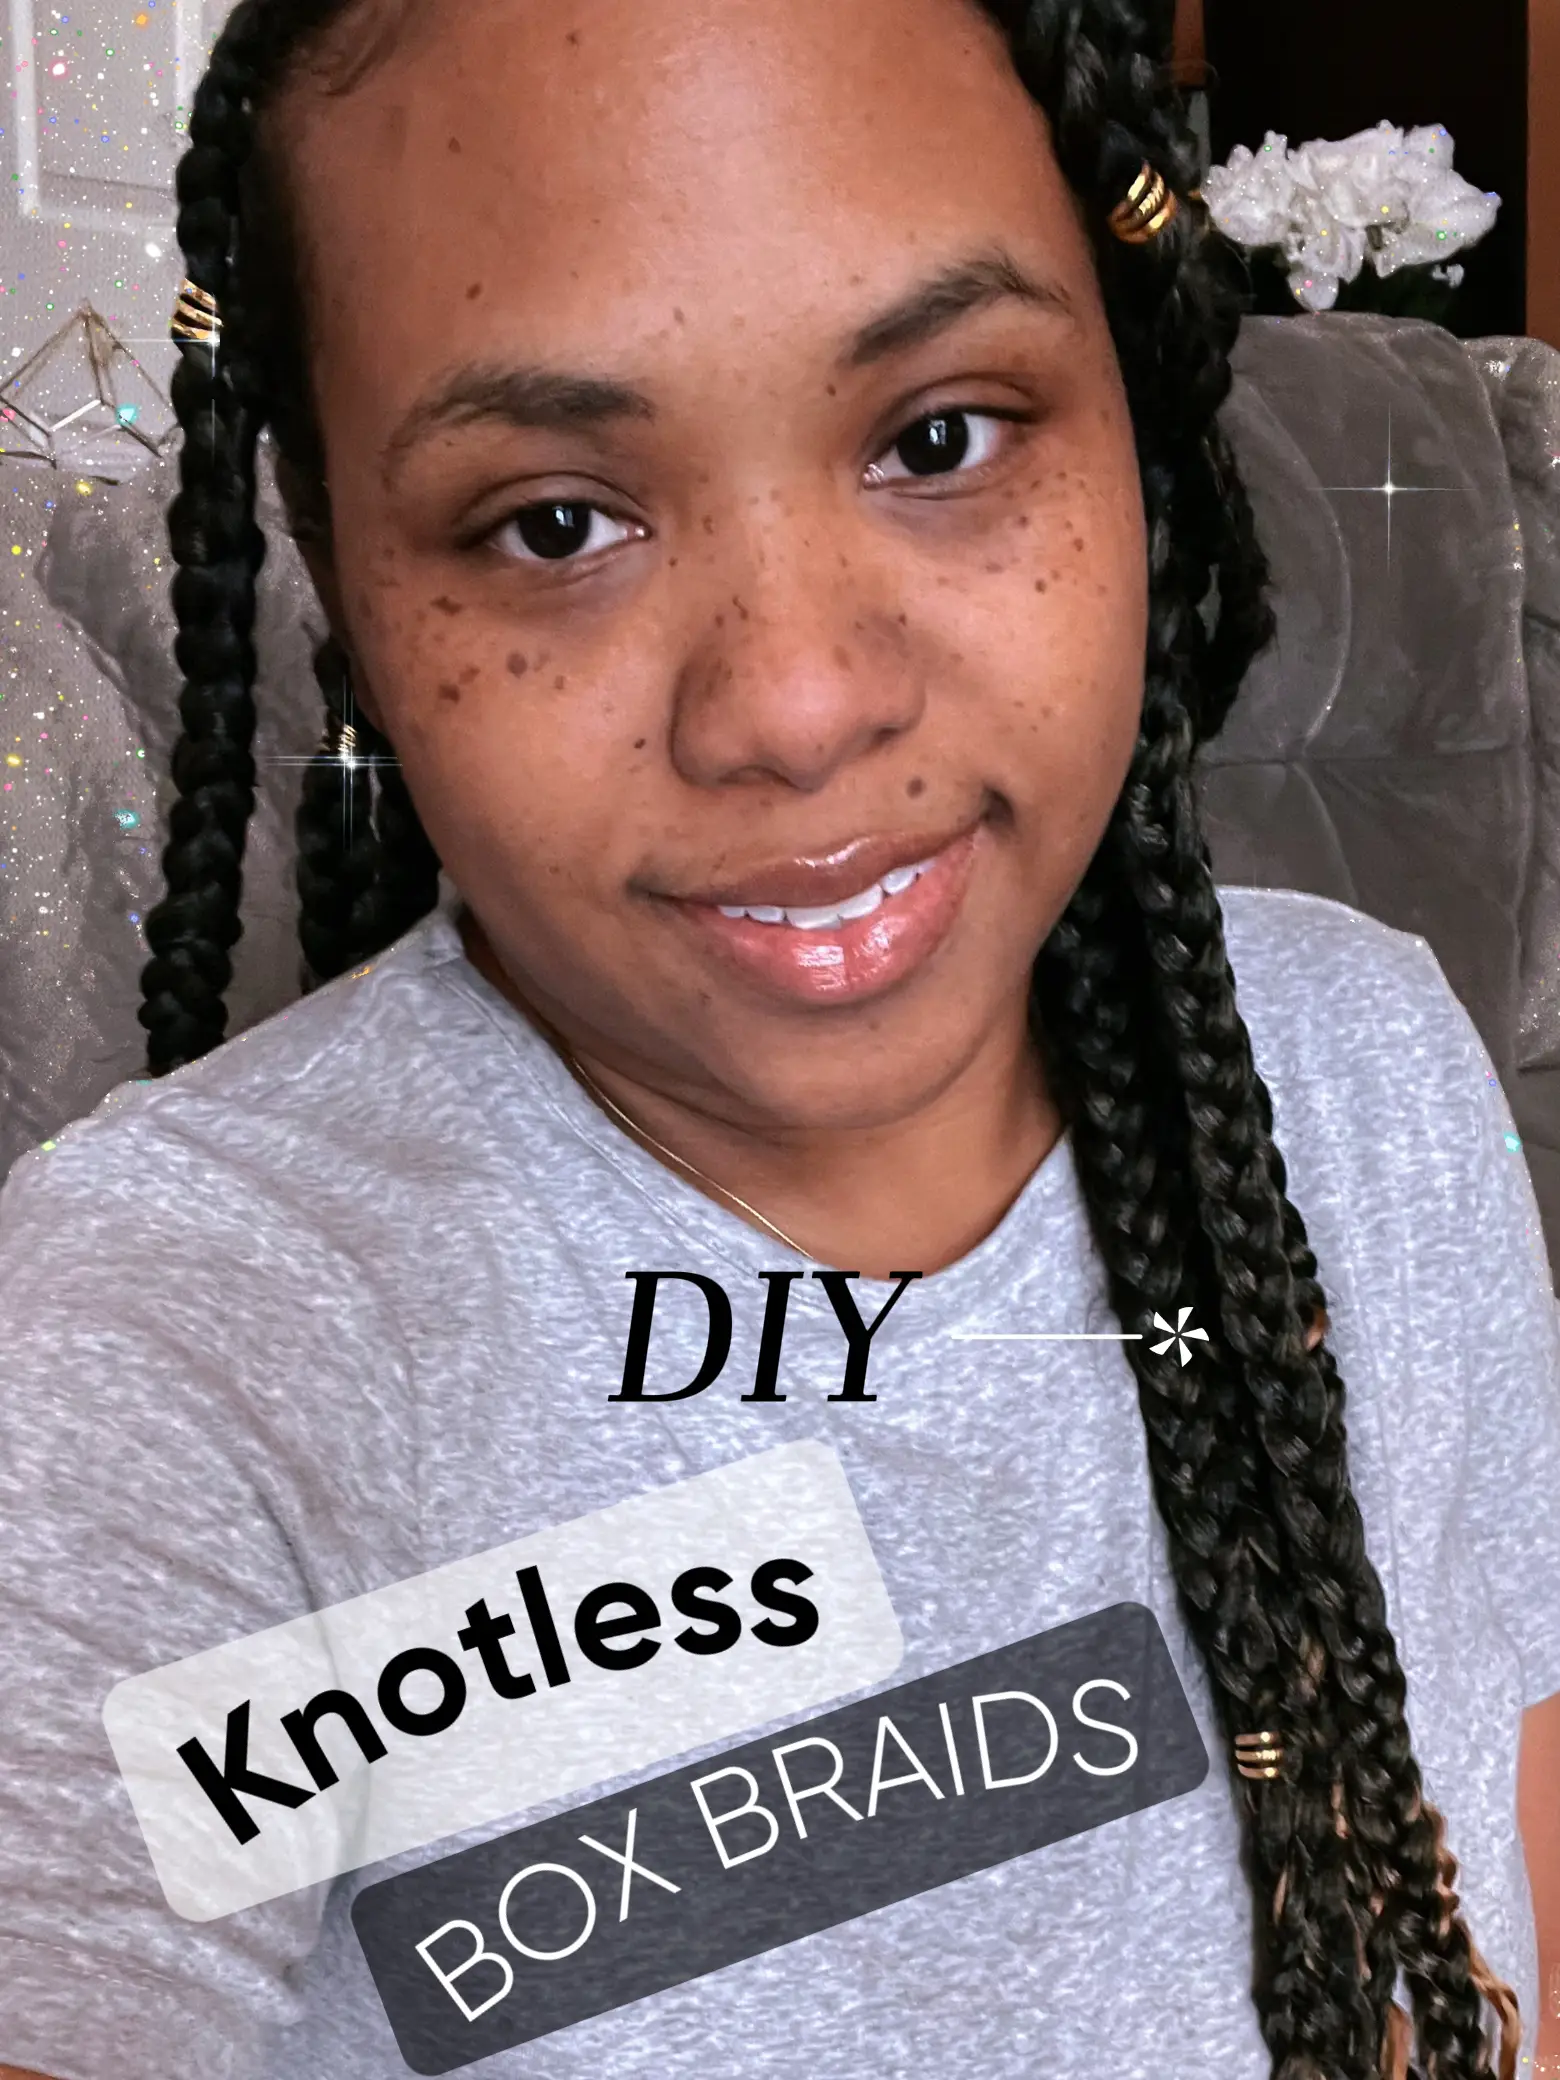 Plaits with beads!! First time using beads because I've only just